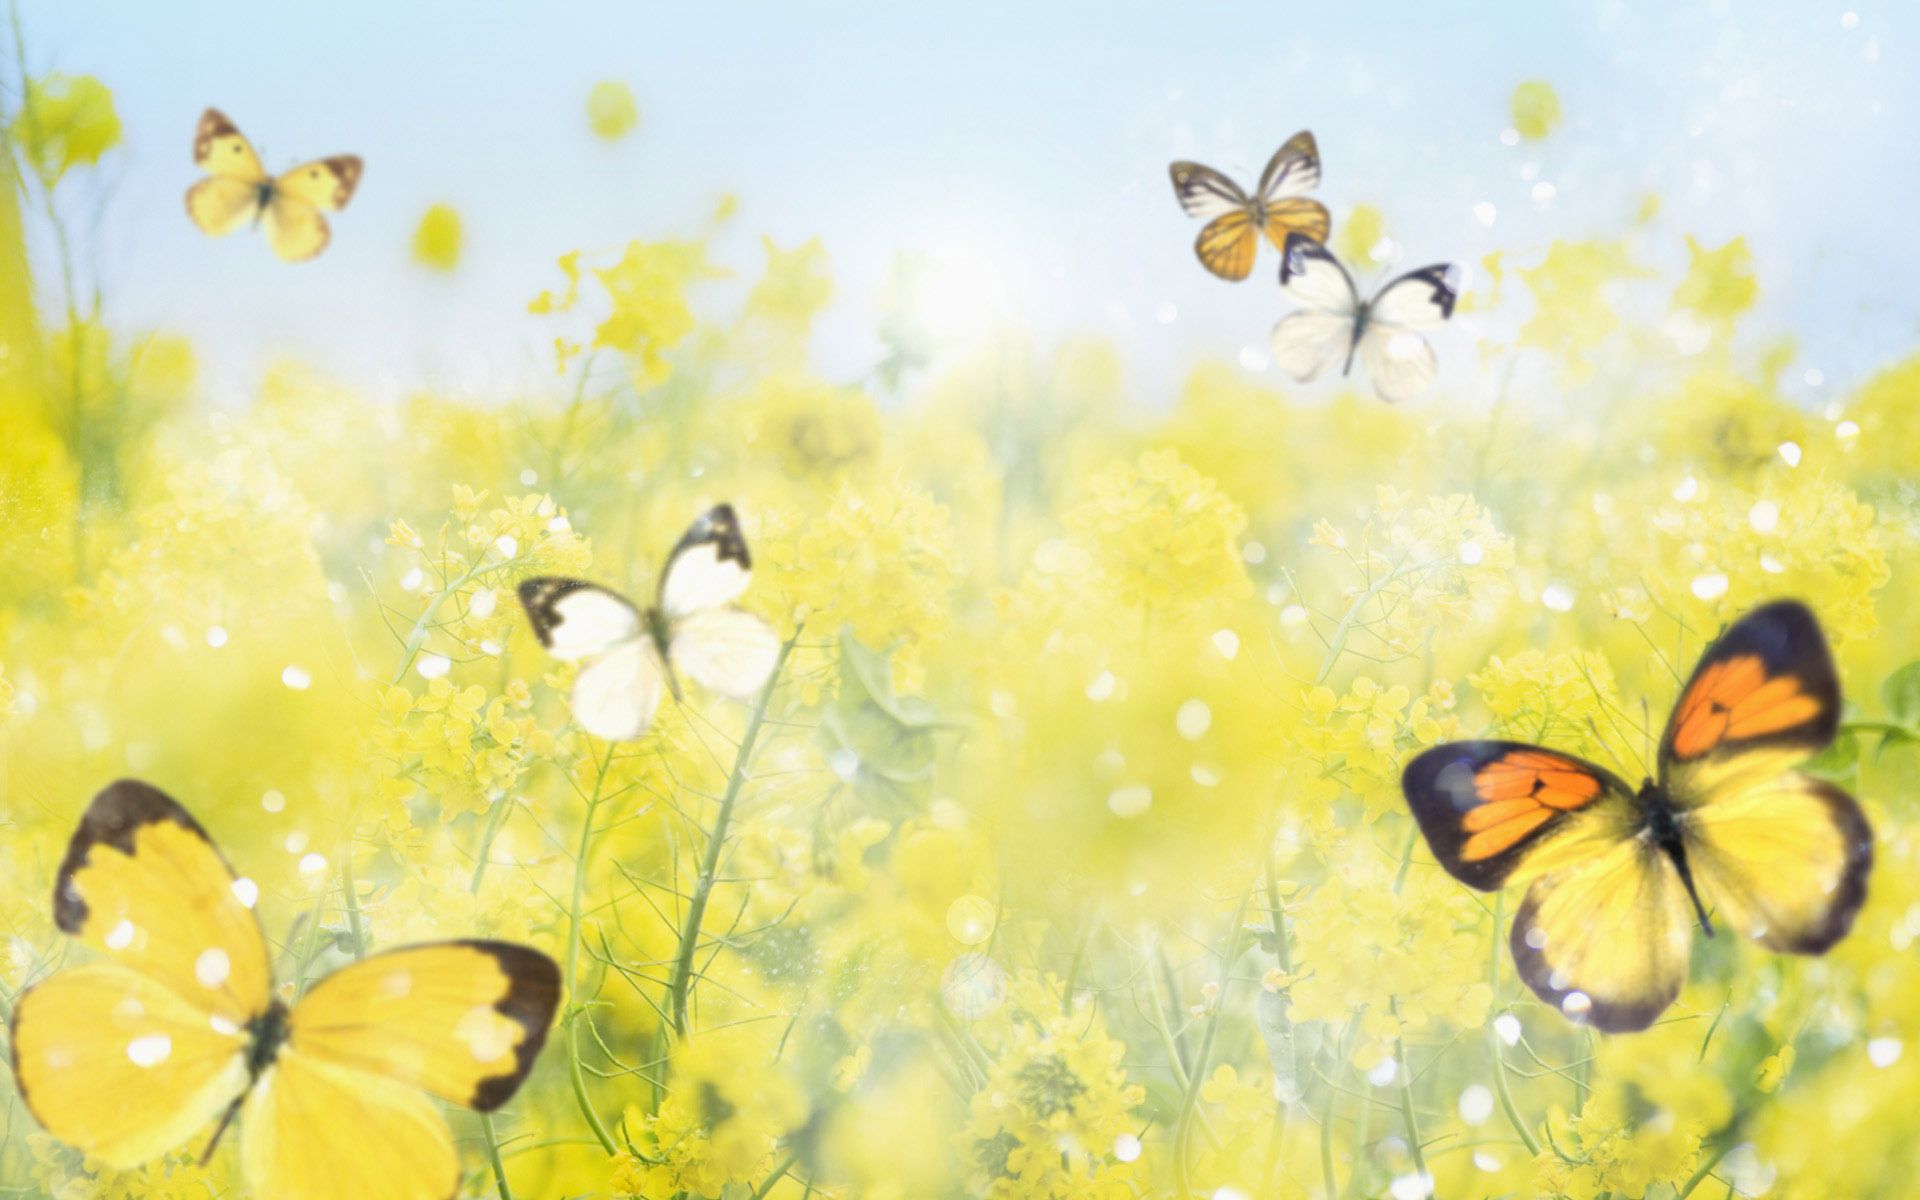 yellow butterfly backgrounds